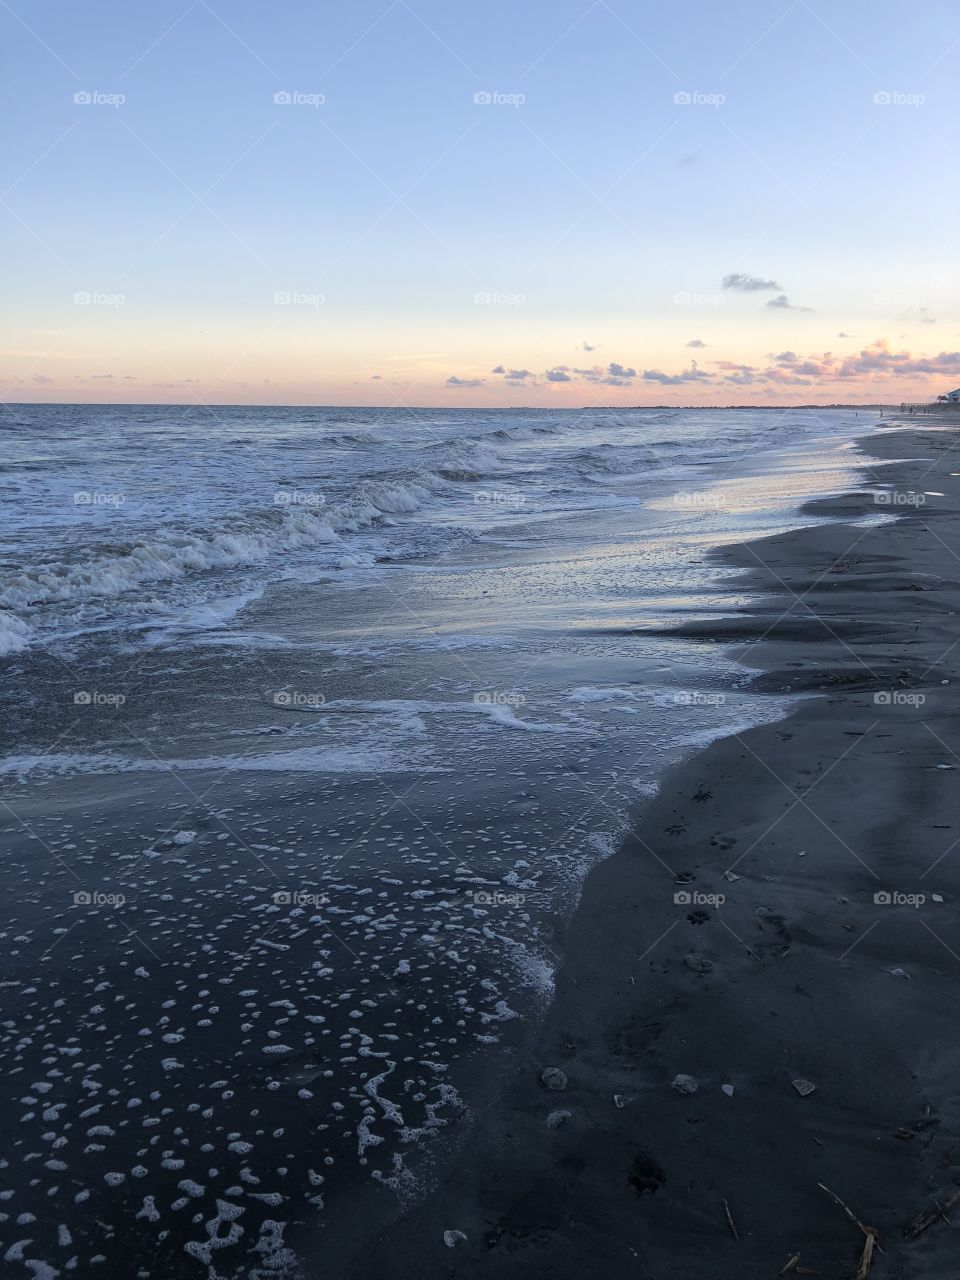 Nature’s patterns leave beautiful marks. Folly Beach, SC